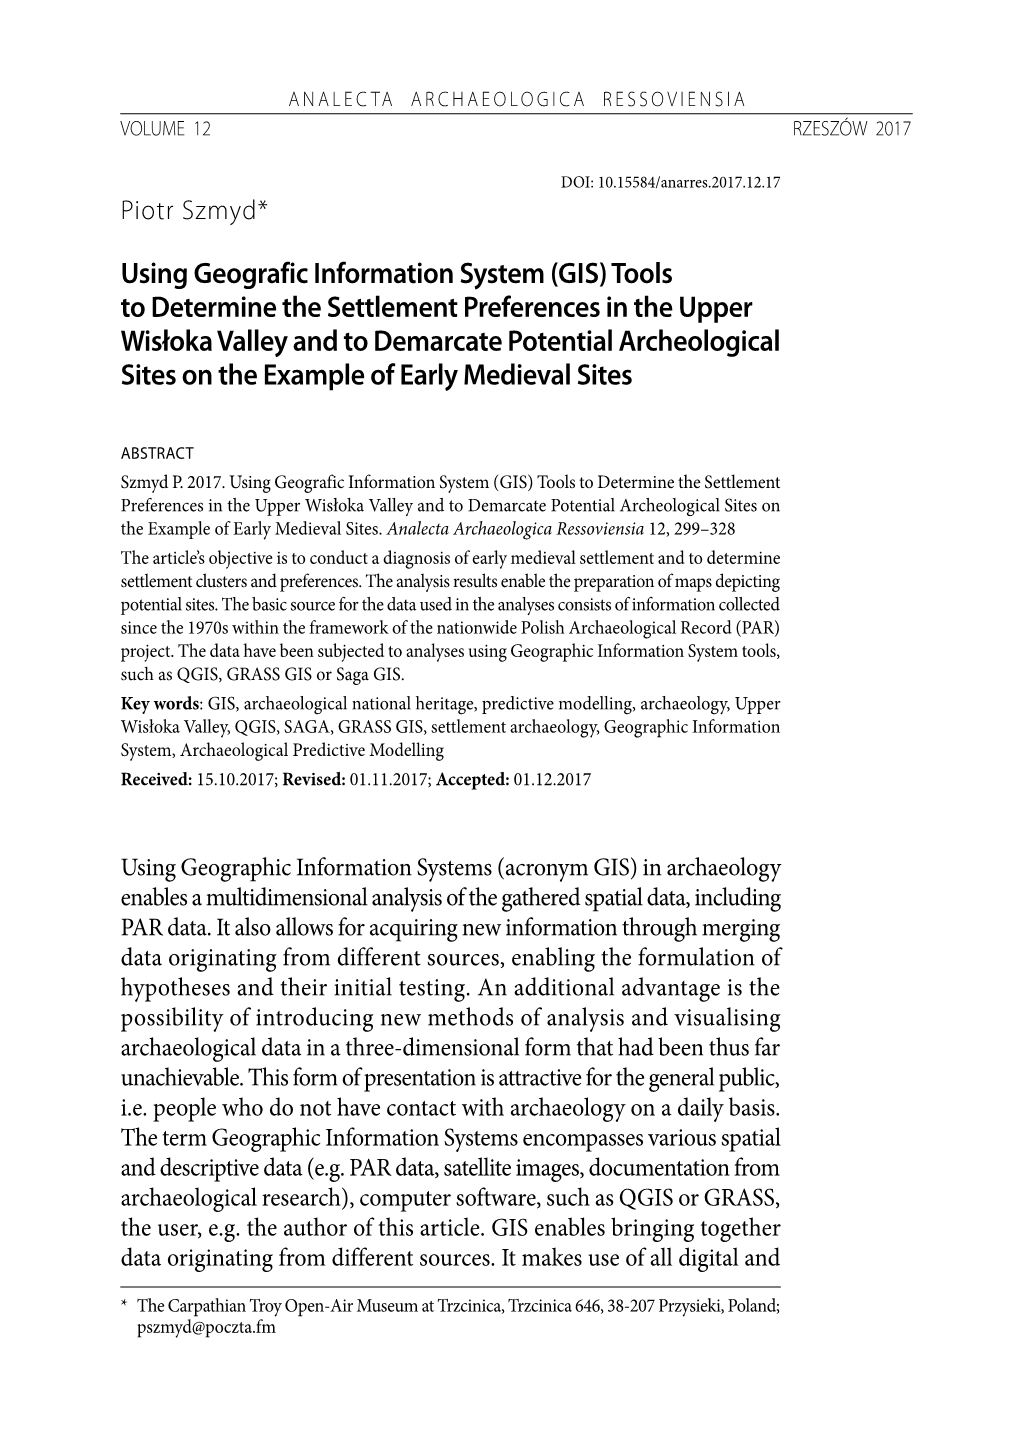 Using Geografic Information System (GIS) Tools to Determine the Settlement Preferences in the Upper Wisłoka Valley and To